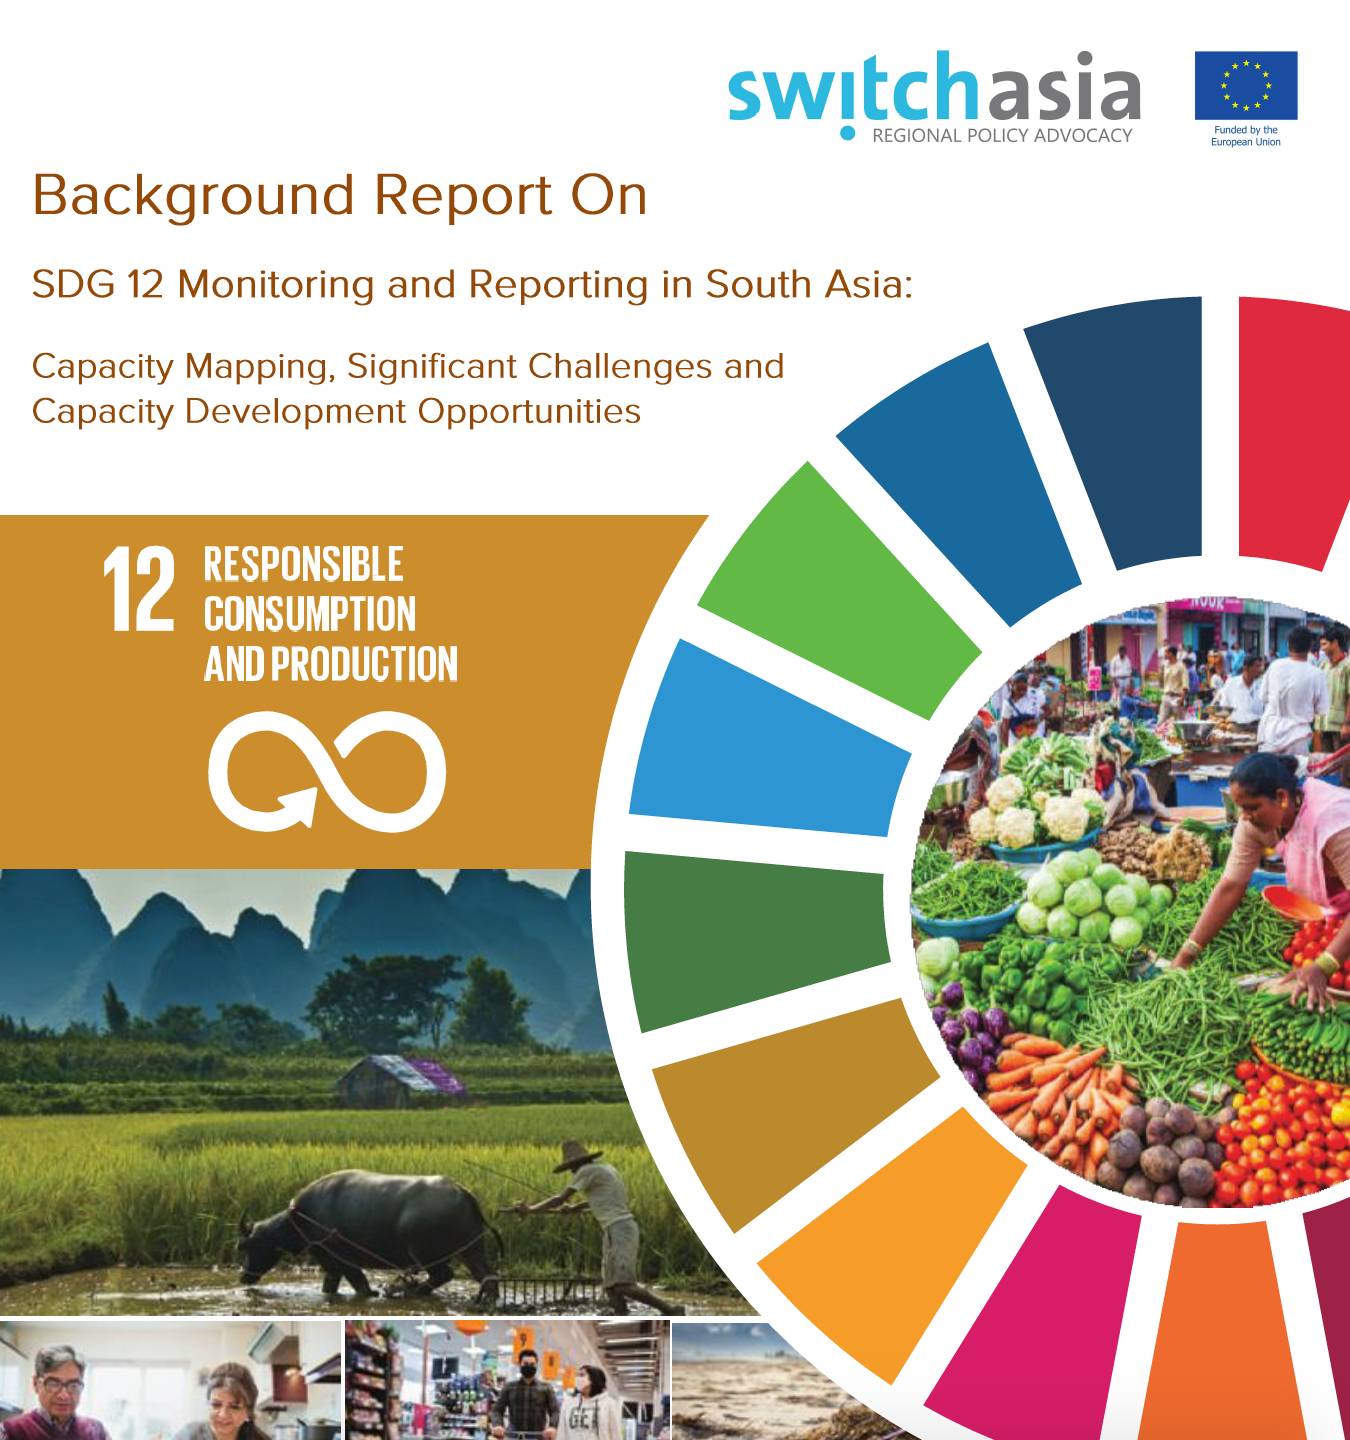 SDG 12 Monitoring and Reporting in South Asia